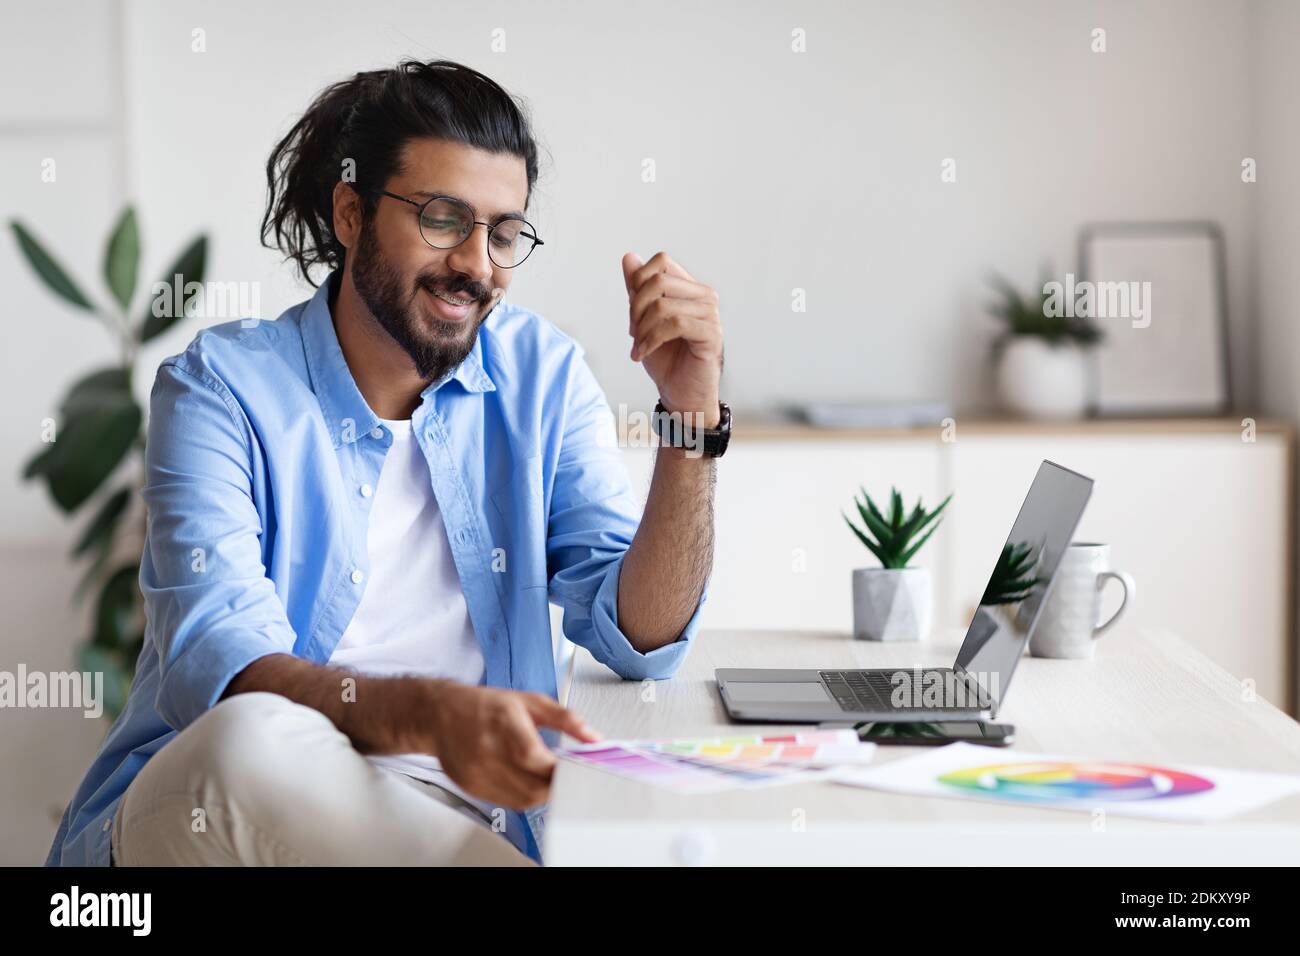 Arab Graphic Designer Working With Color Swatches And Laptop At Home Office Stock Photo